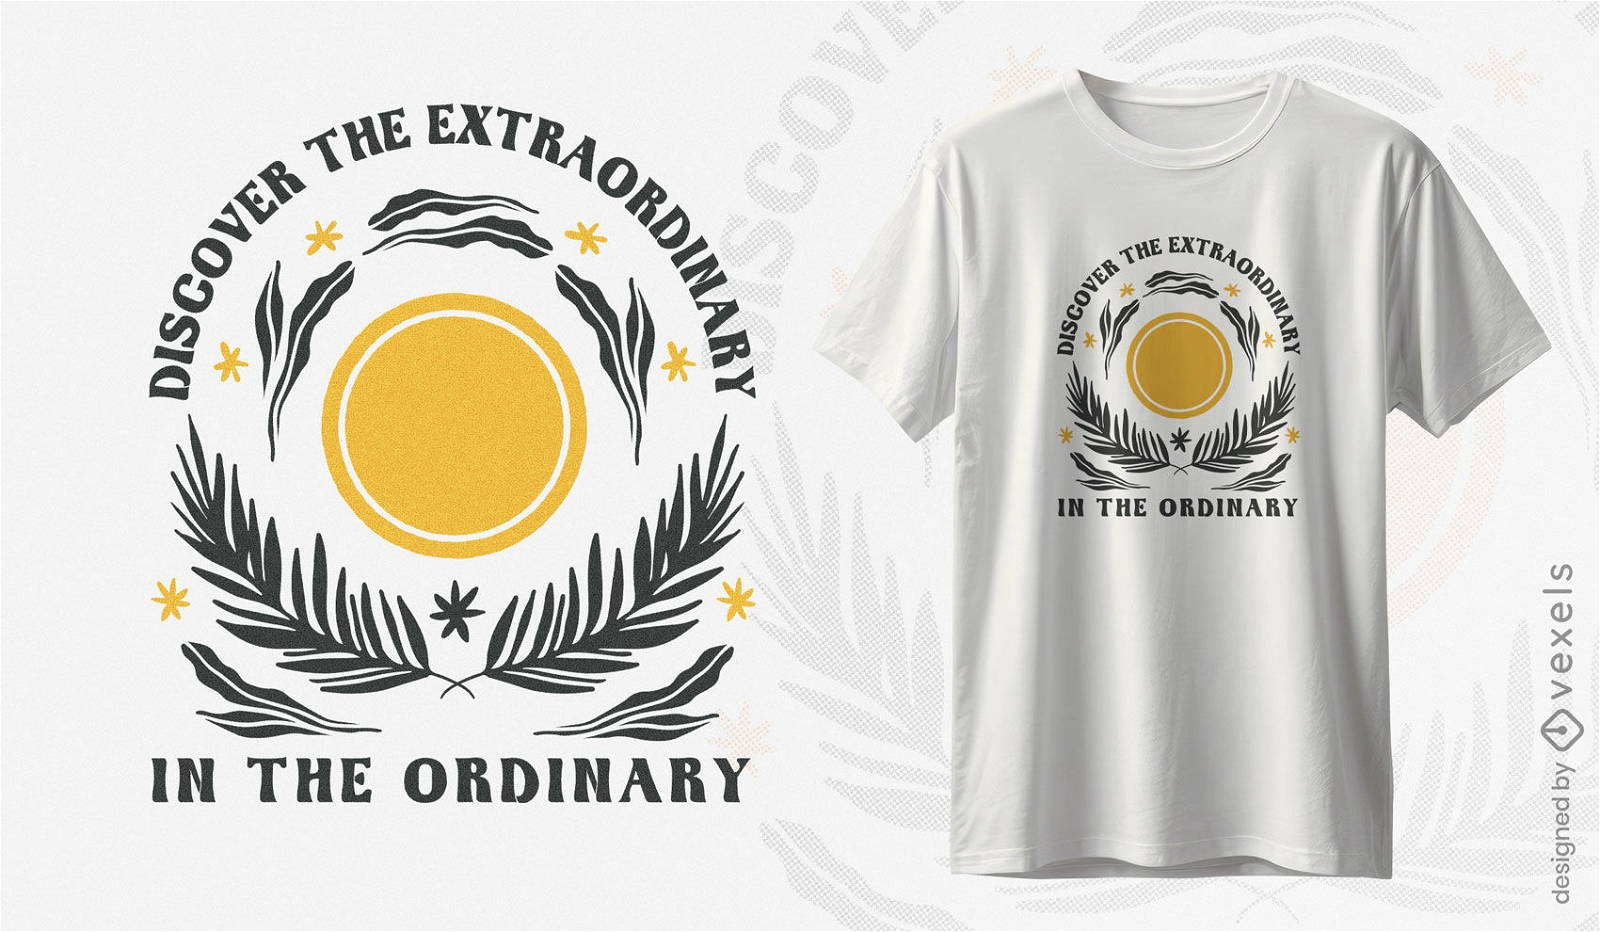 Discover the extraordinary in the ordinary t-shirt design